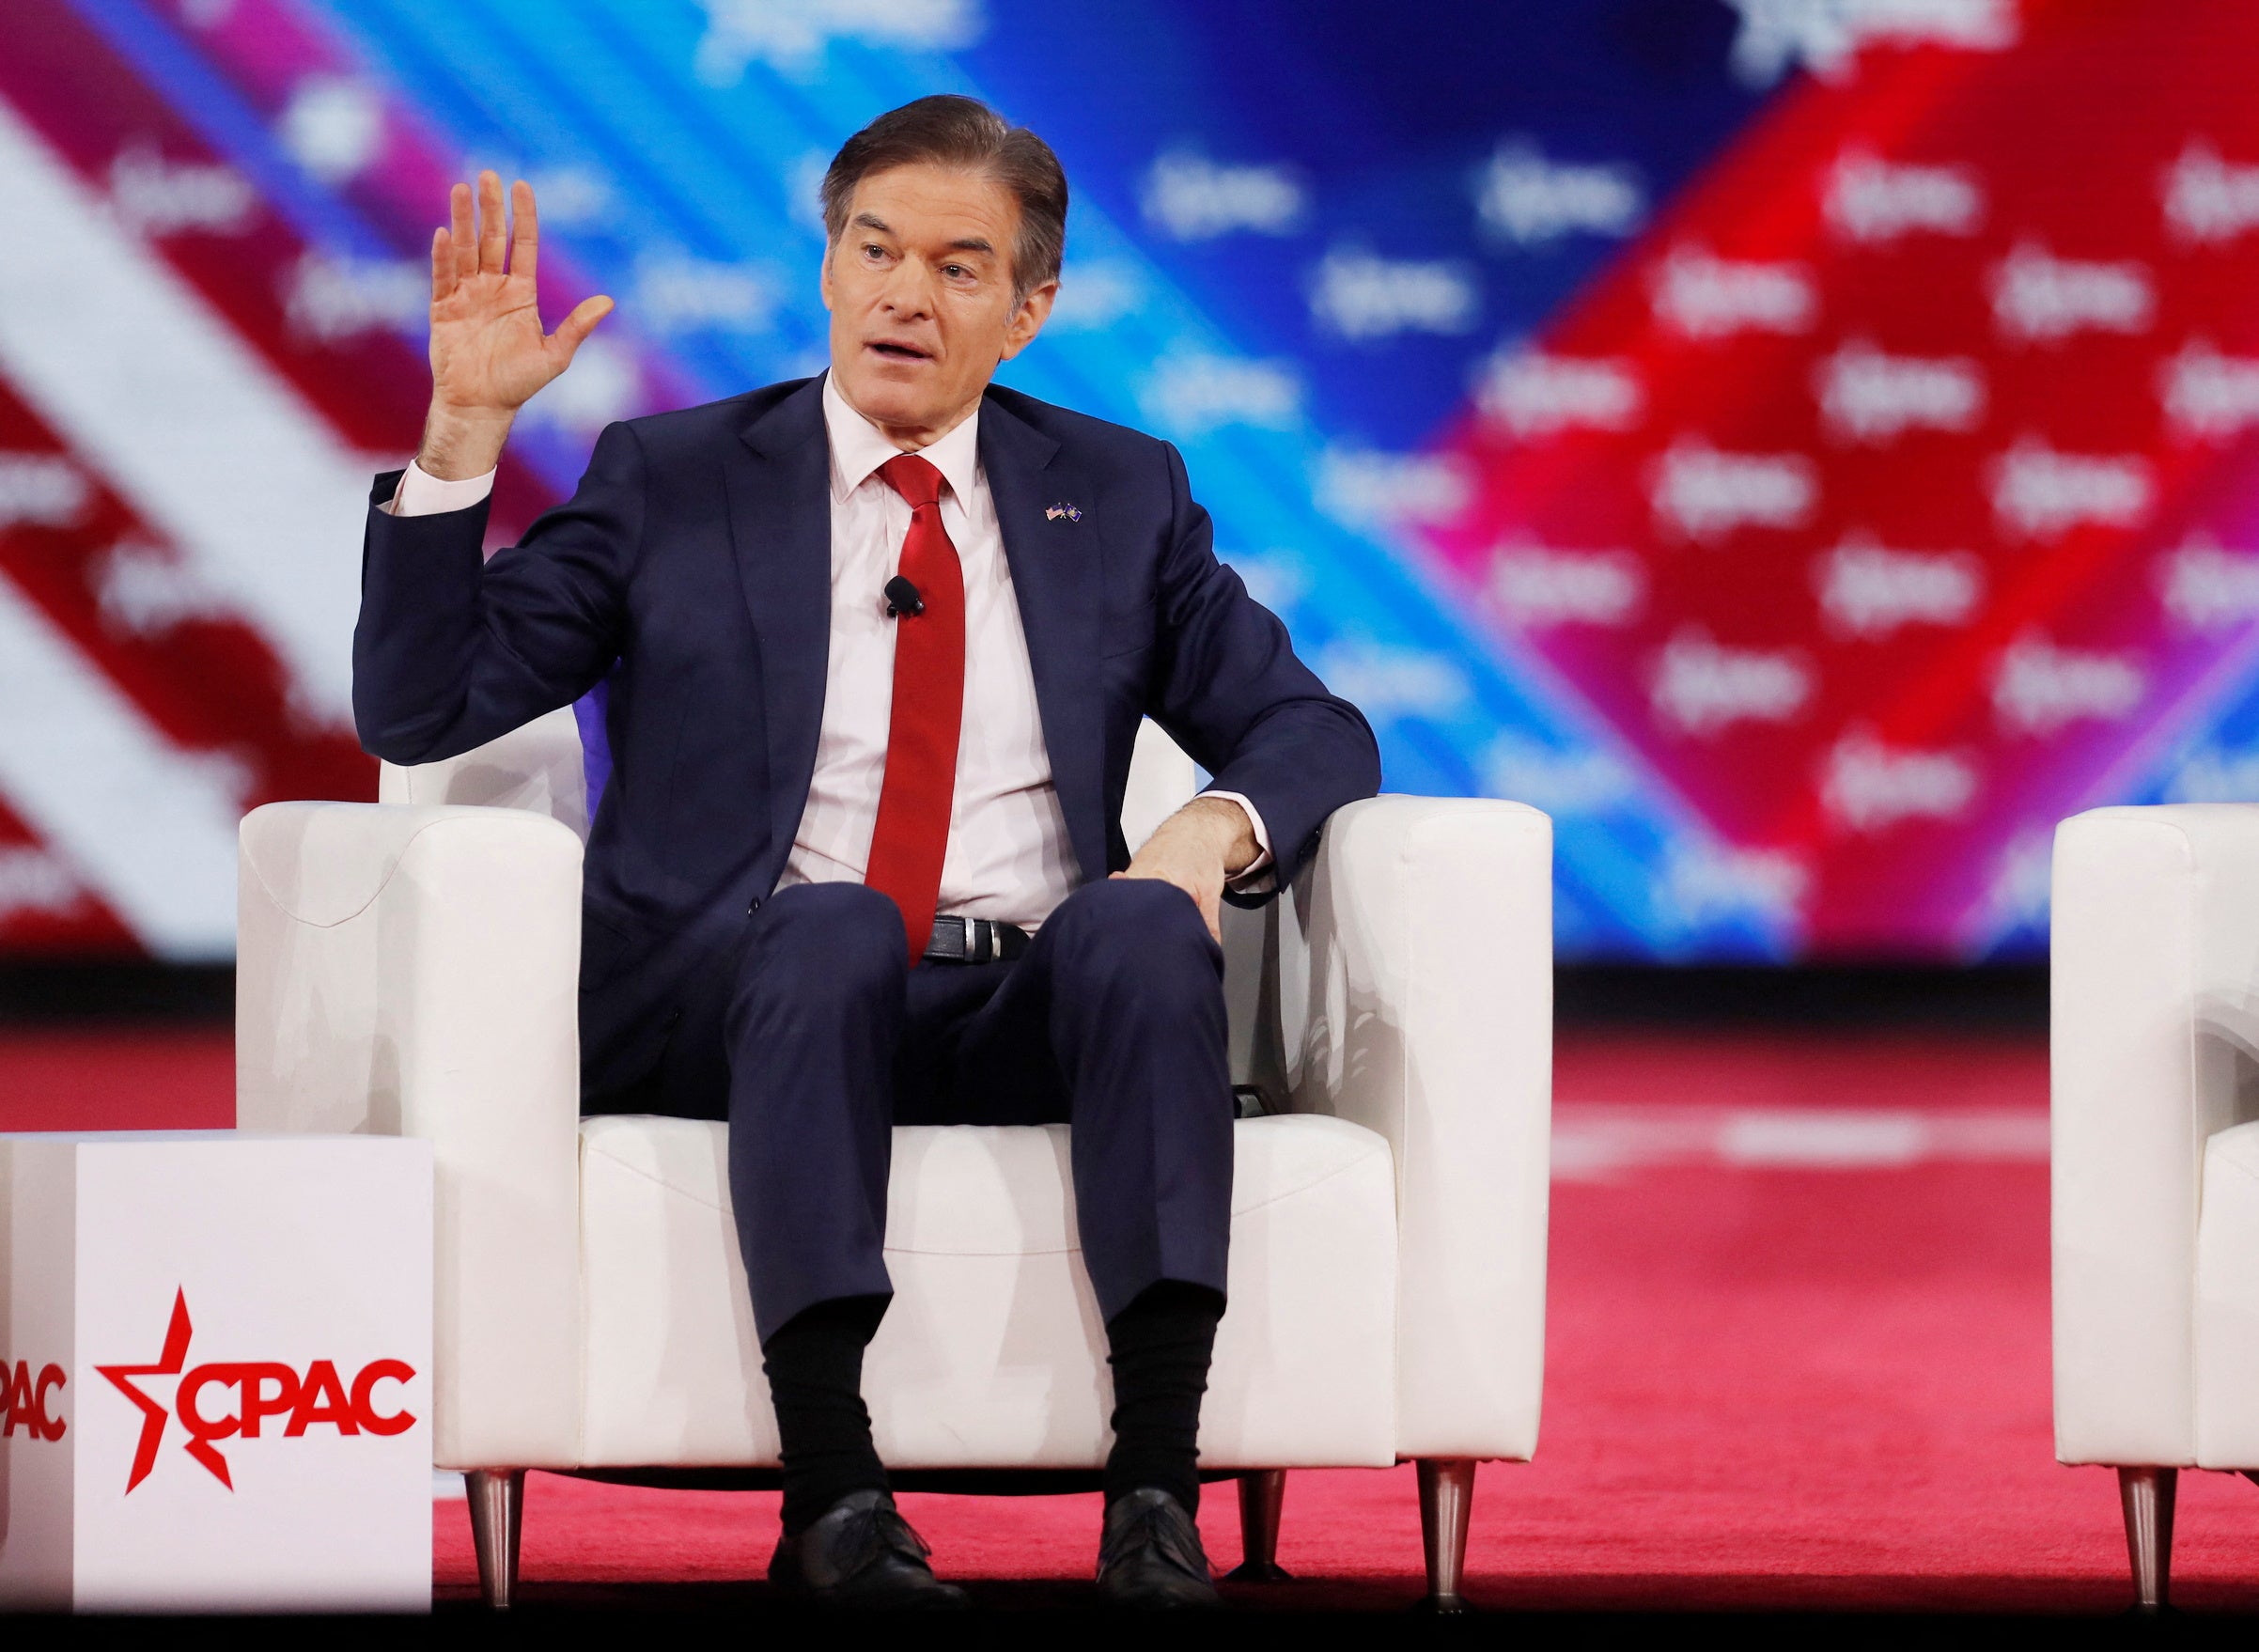 Dr Oz at the Conservative Political Action Conference in Orlando, Florida, on 27 February 2022